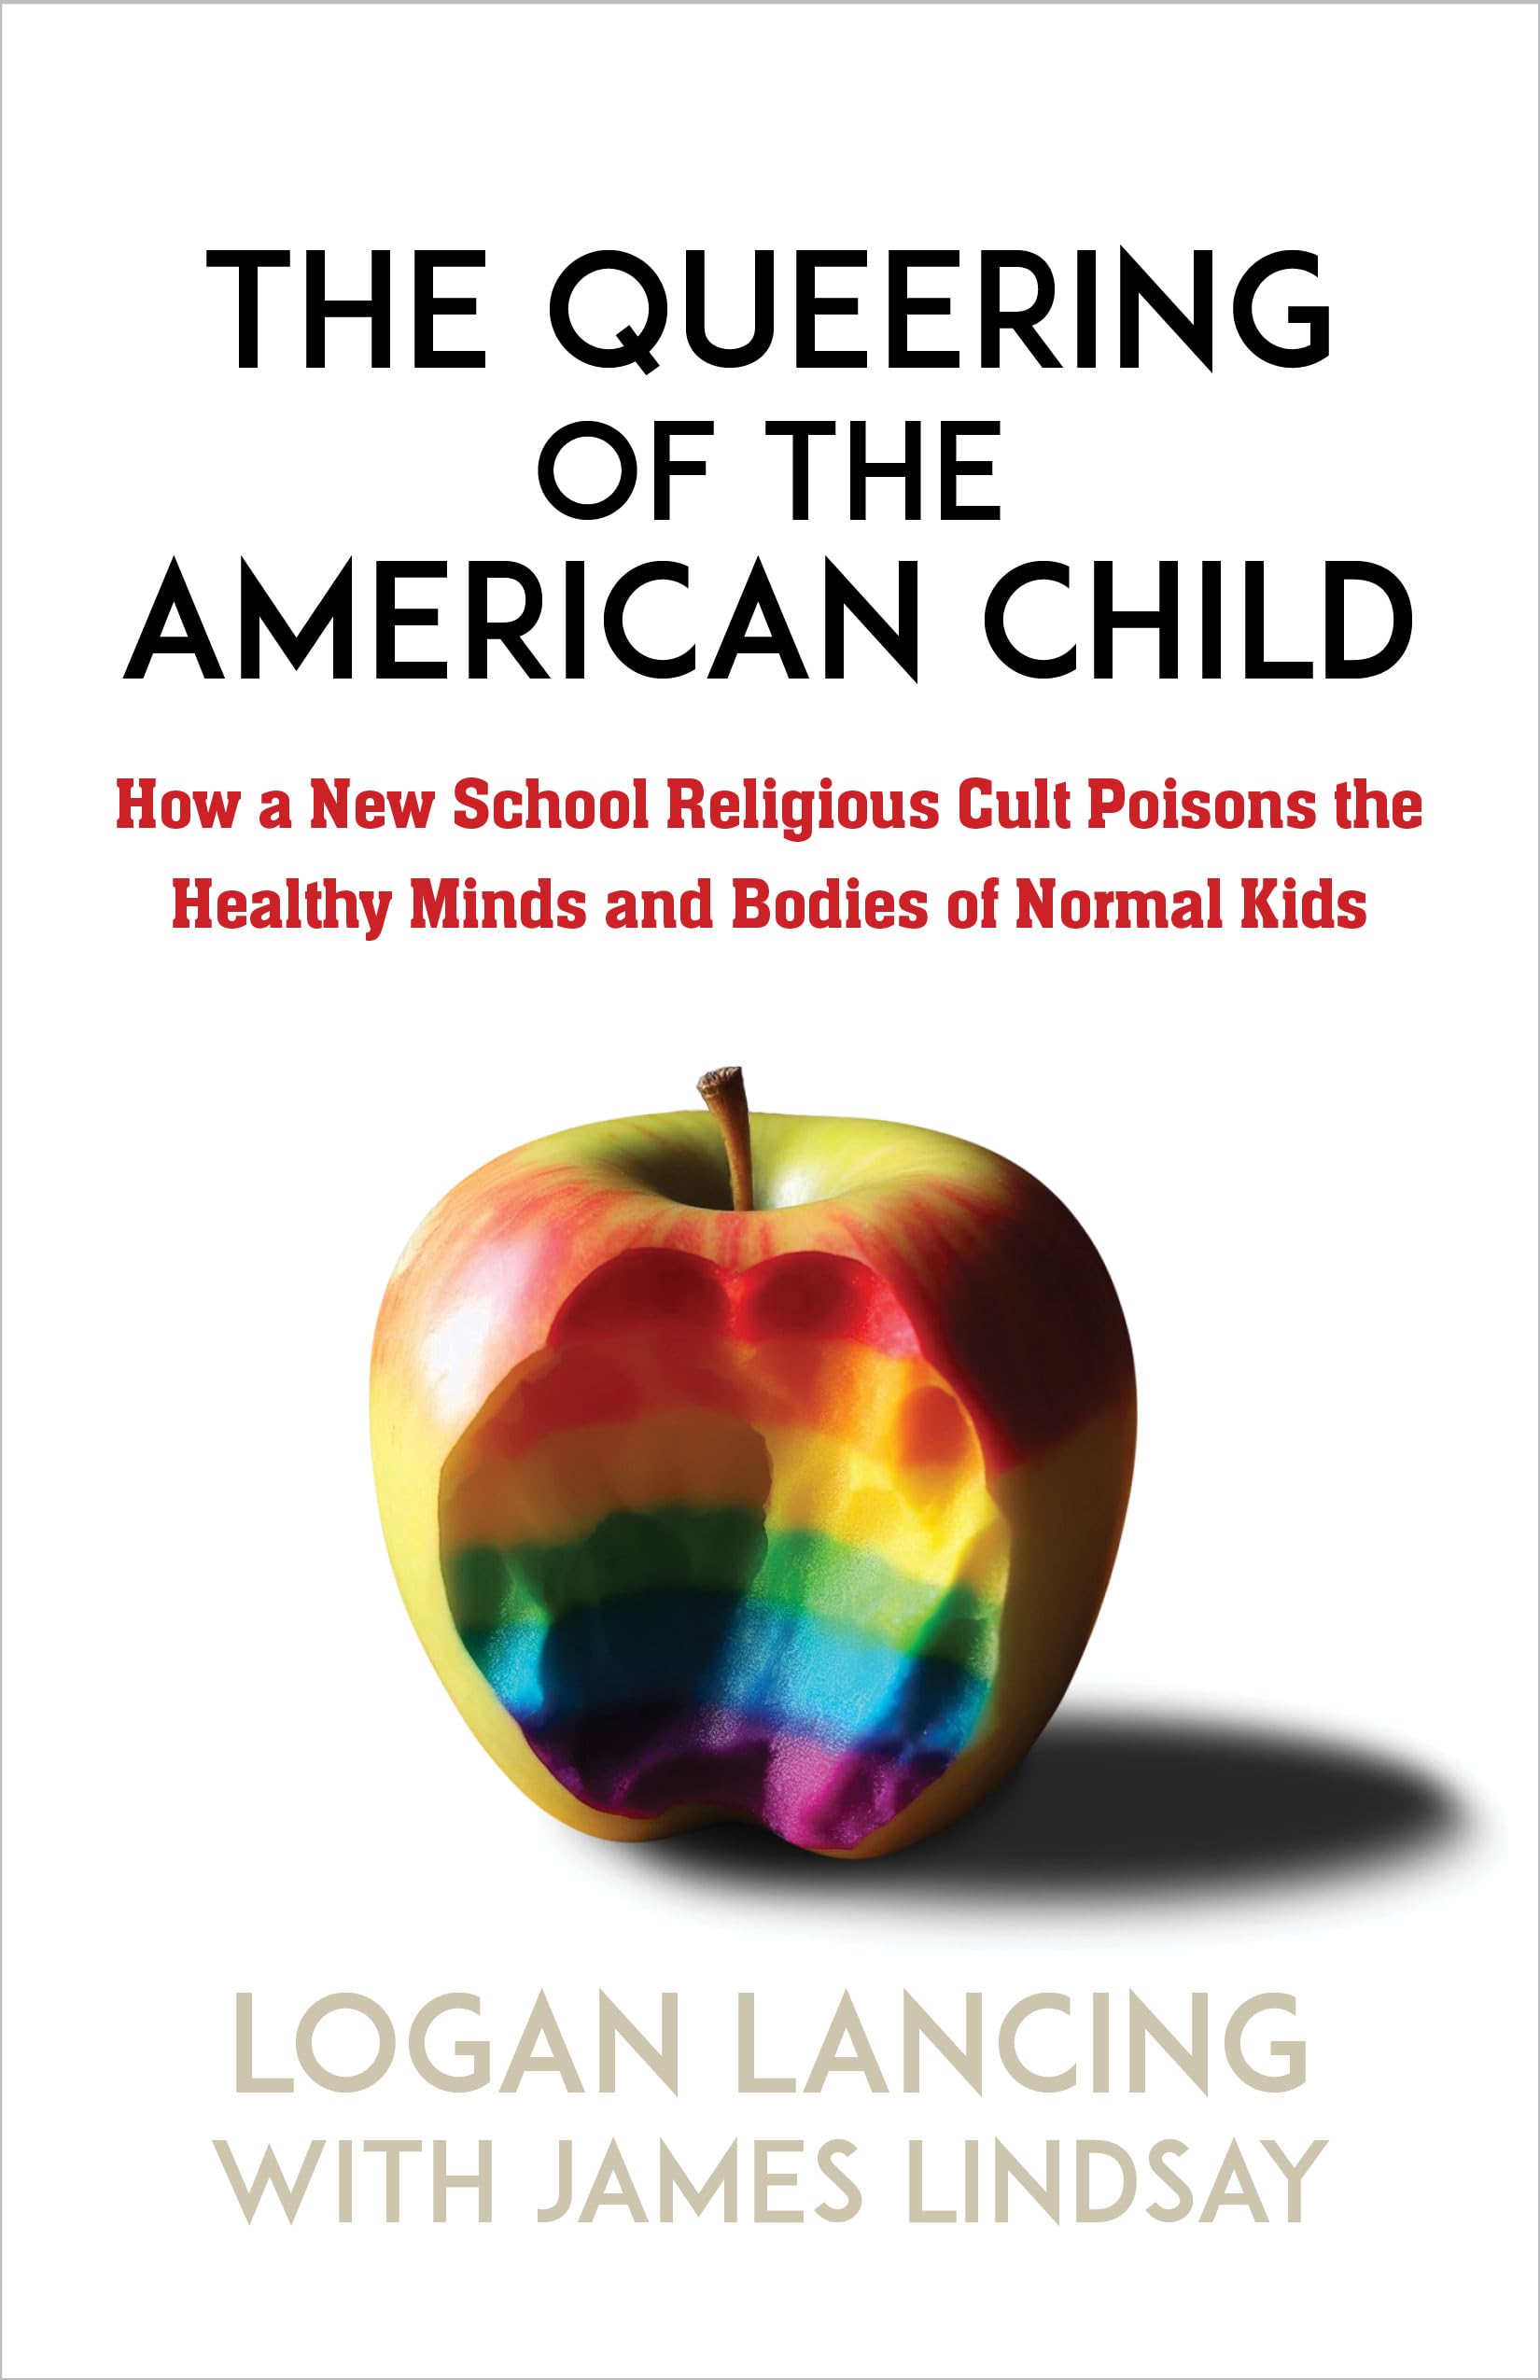 The Queering of the American Child: How A New School Religious Cult Poisons the Minds and Bodies of Normal Kids